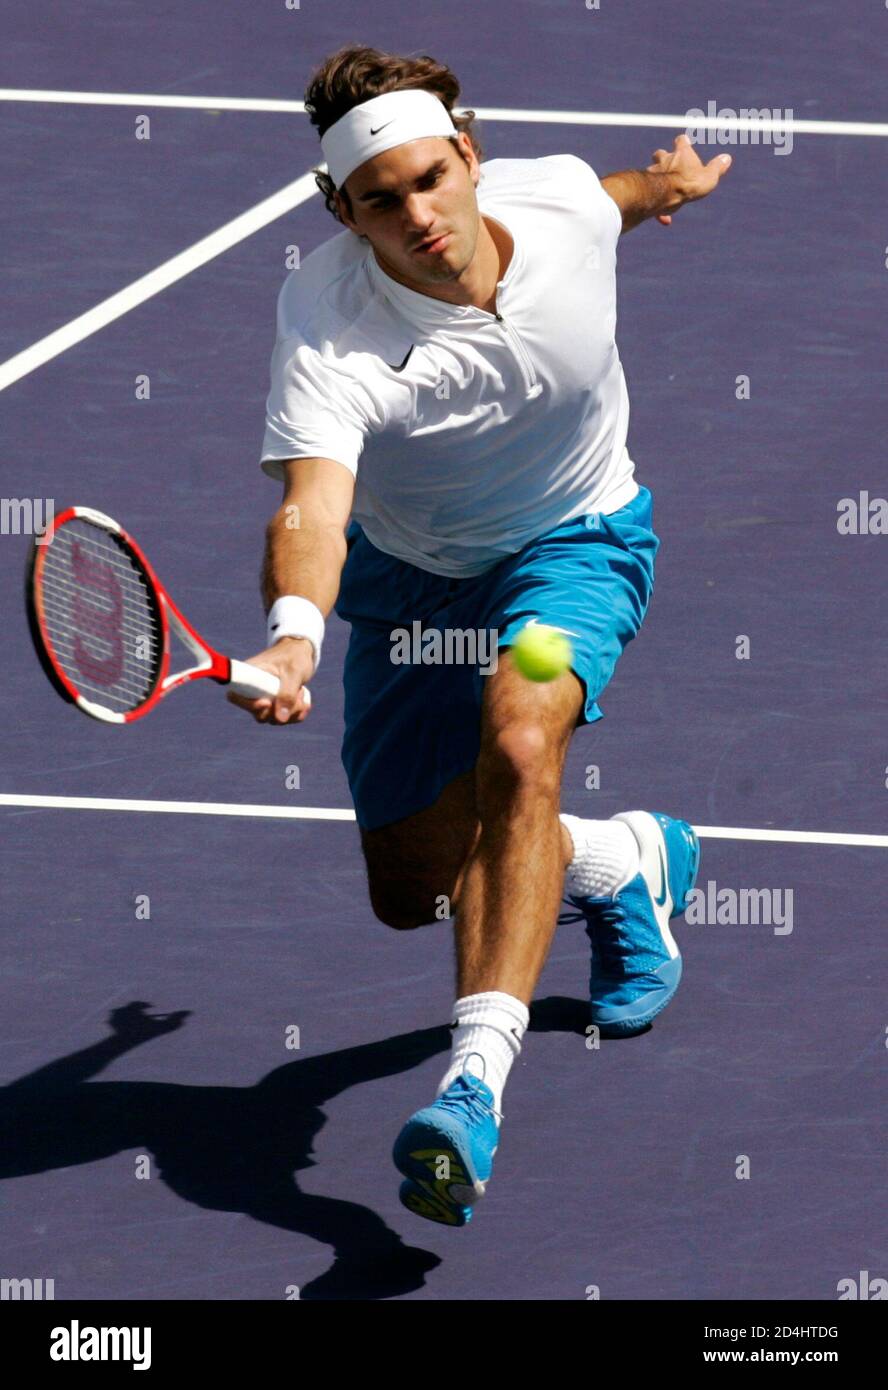 Roger Federer of Switzerland hits a volley to Lleyton Hewitt of Australia  during the men's final of the Pacific Life Open in Indian Wells,  California, March 20, 2005. Federer, the defending champion,